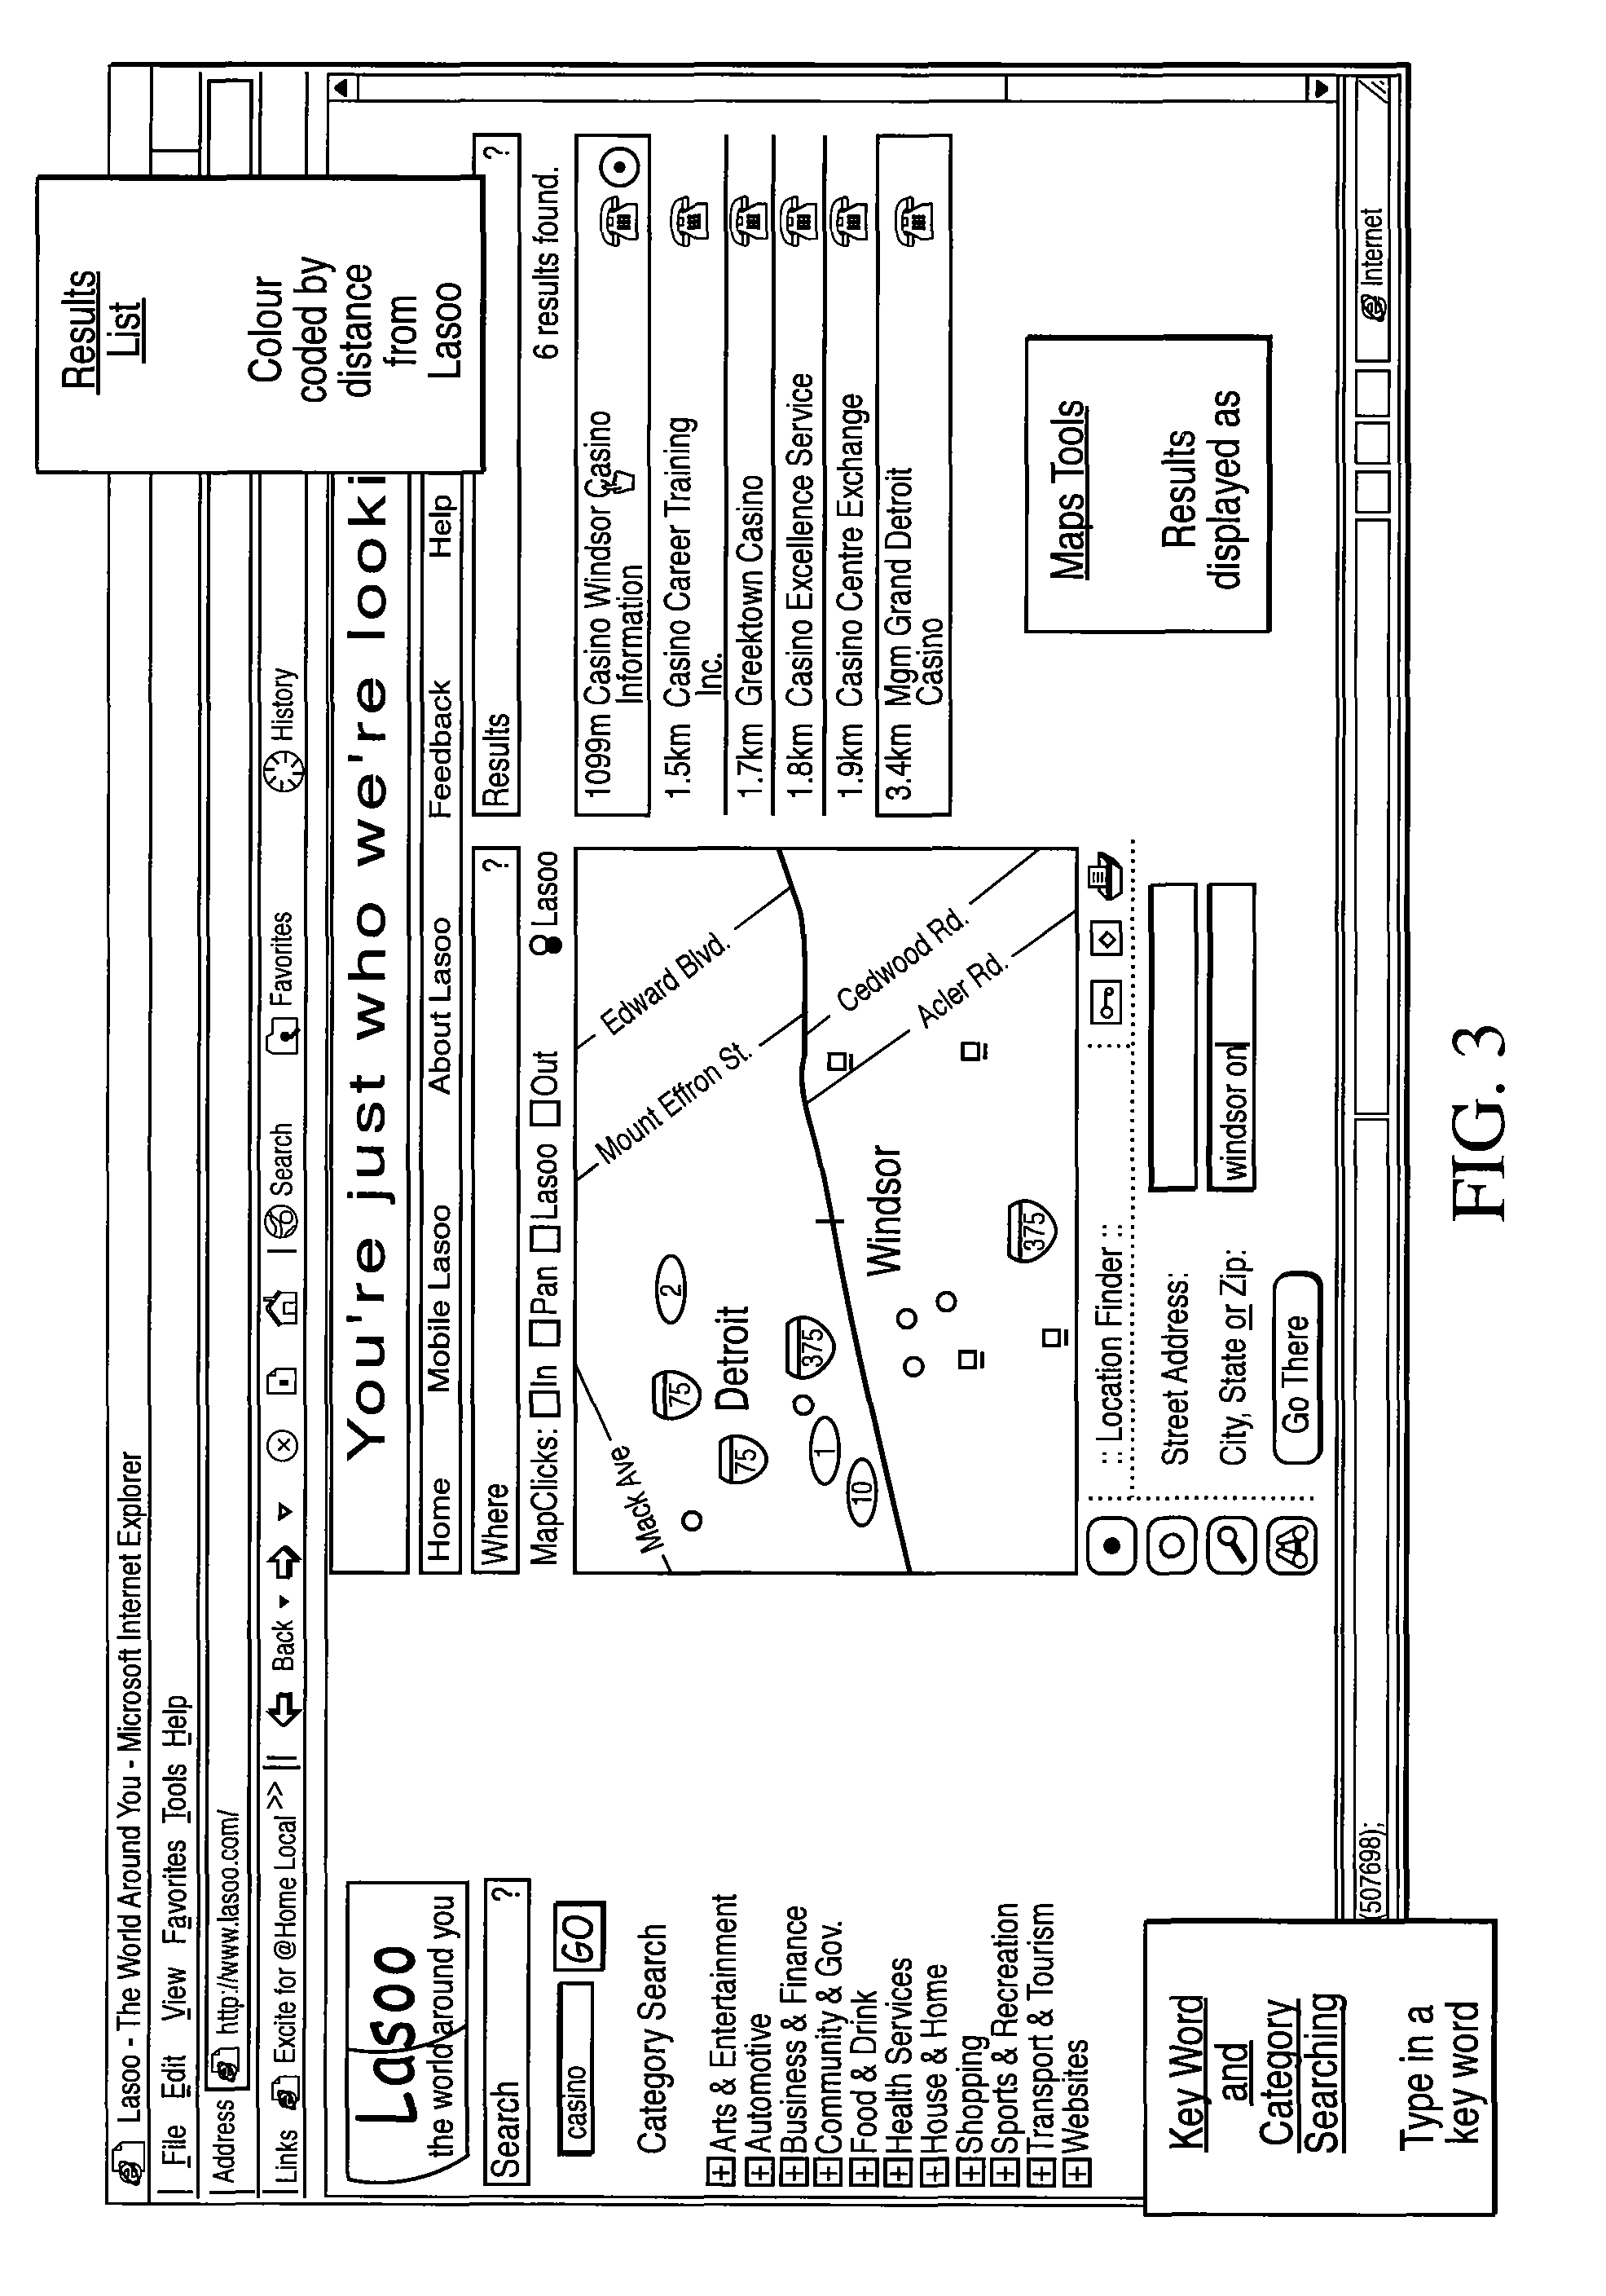 Information retrieval system and method employing spatially selective features